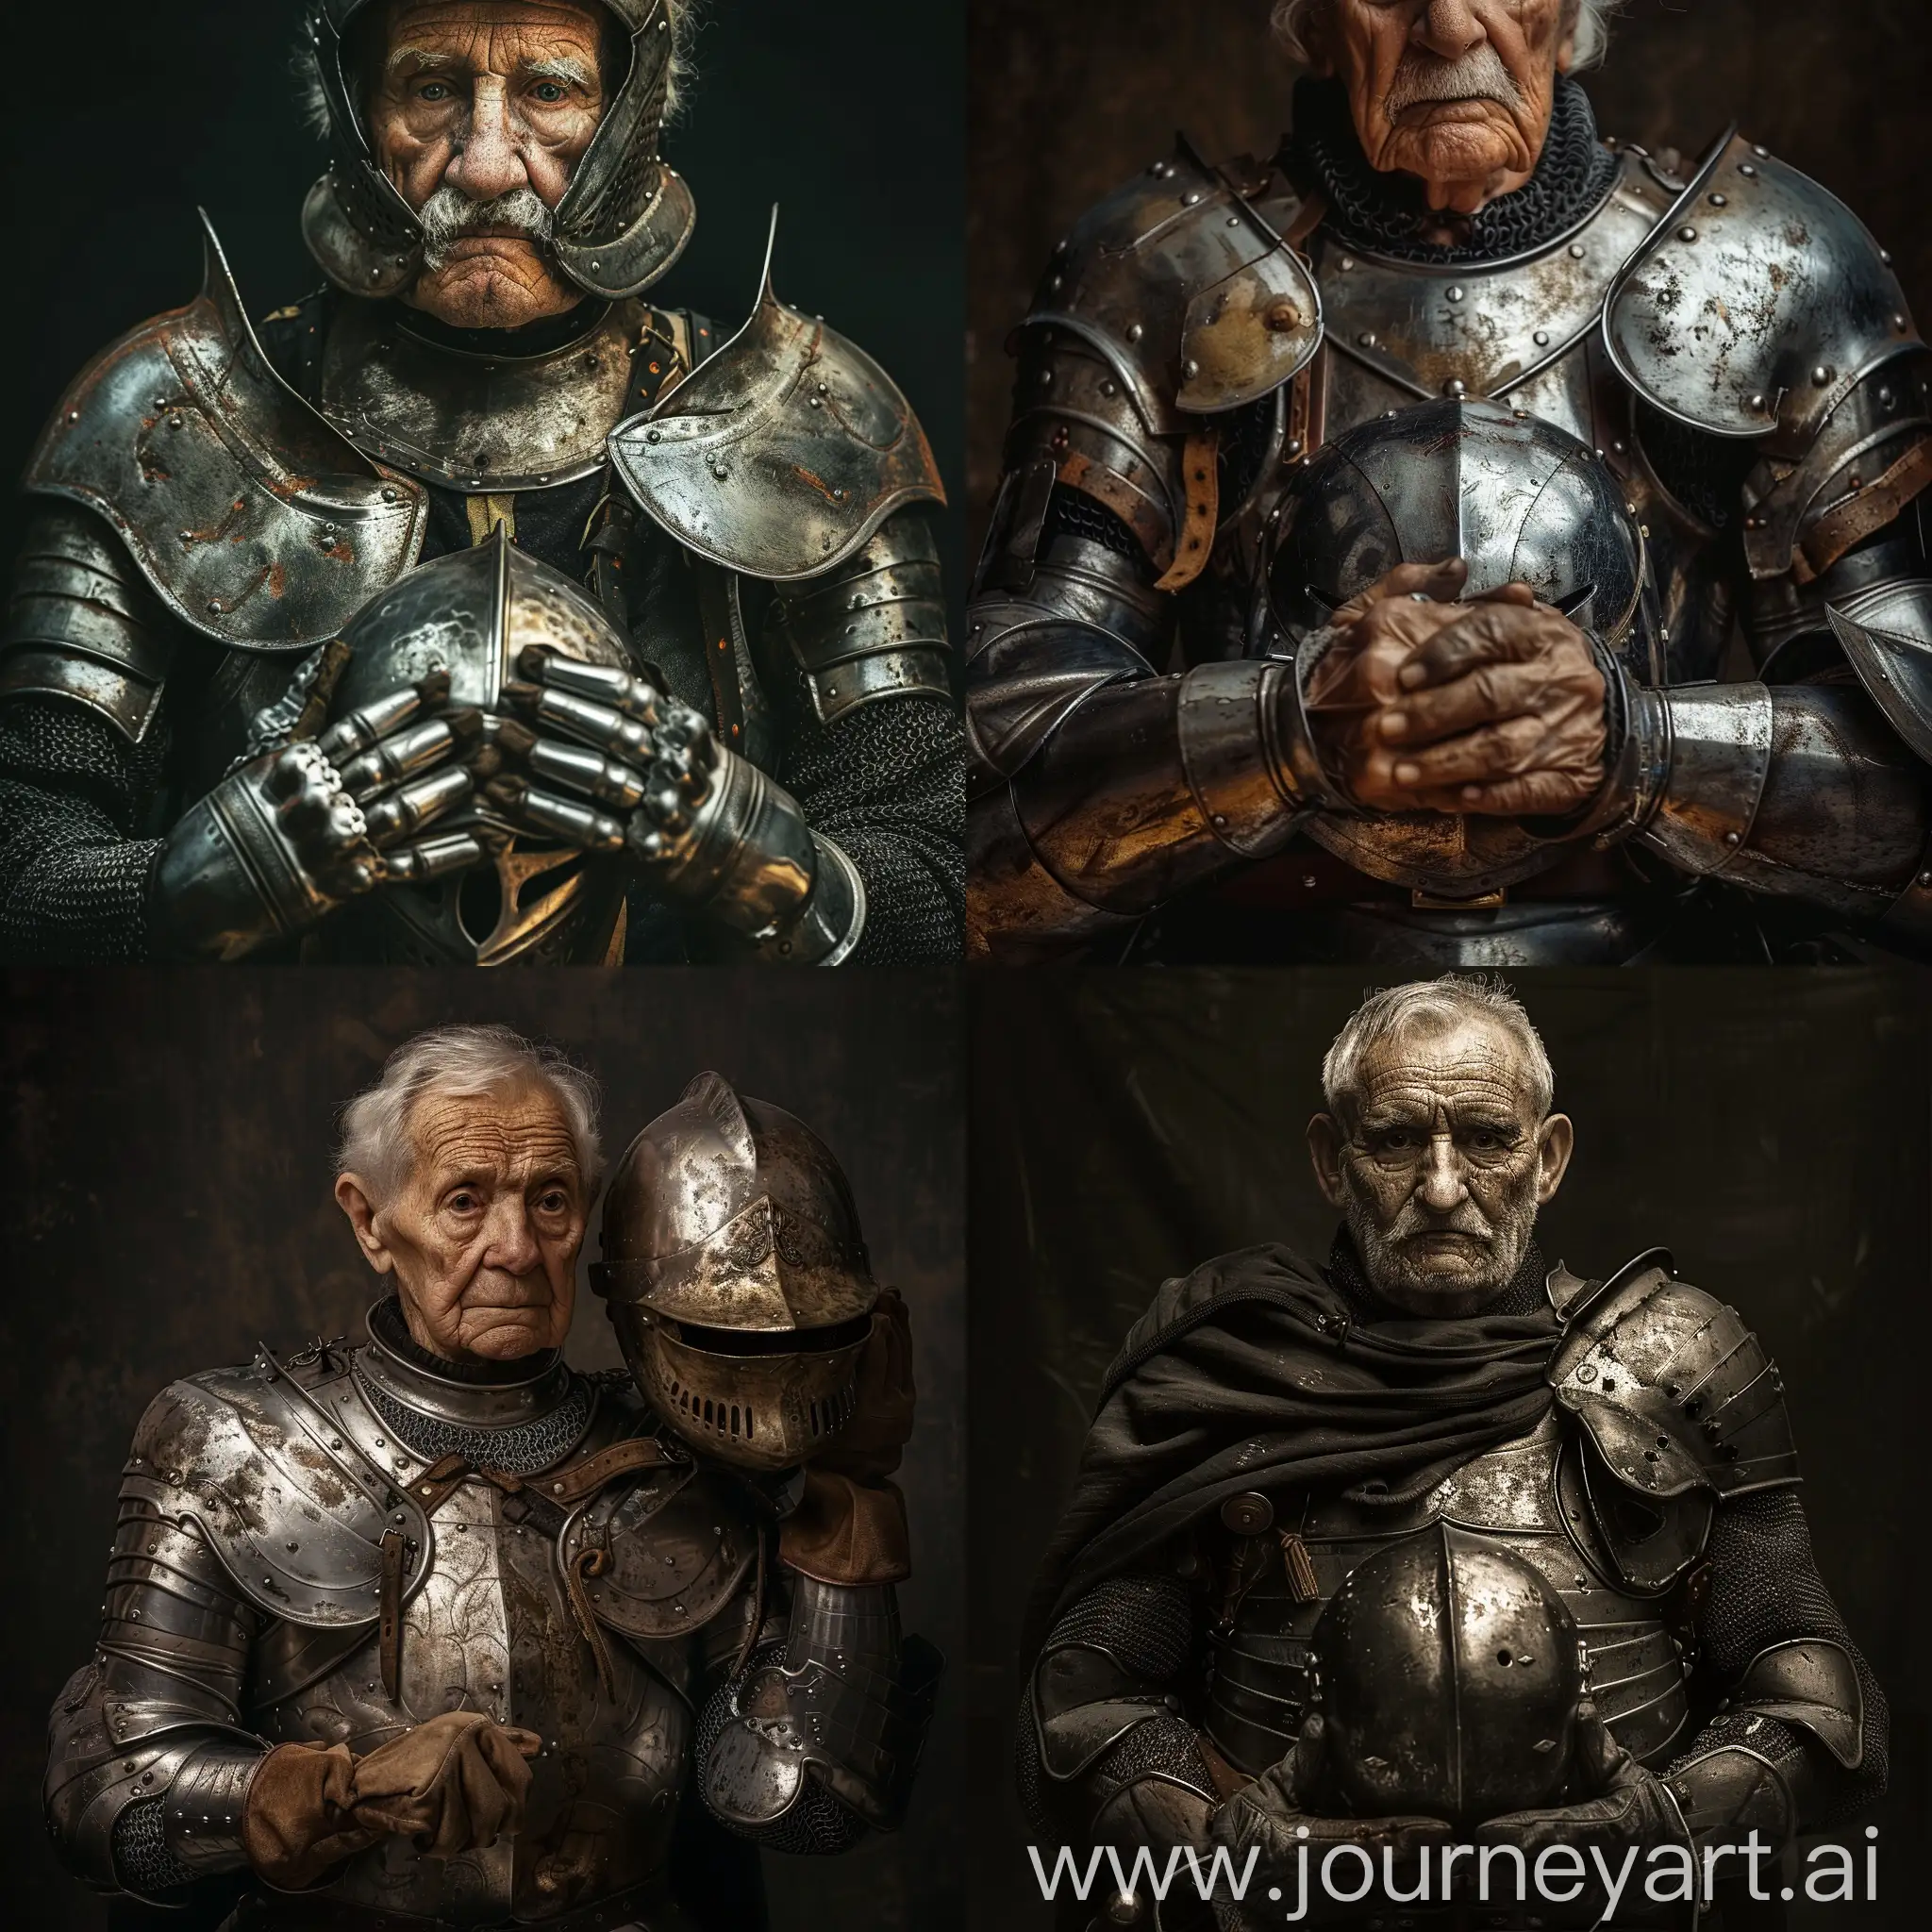 Aged-Knight-Holding-Helmet-in-Plate-Armor